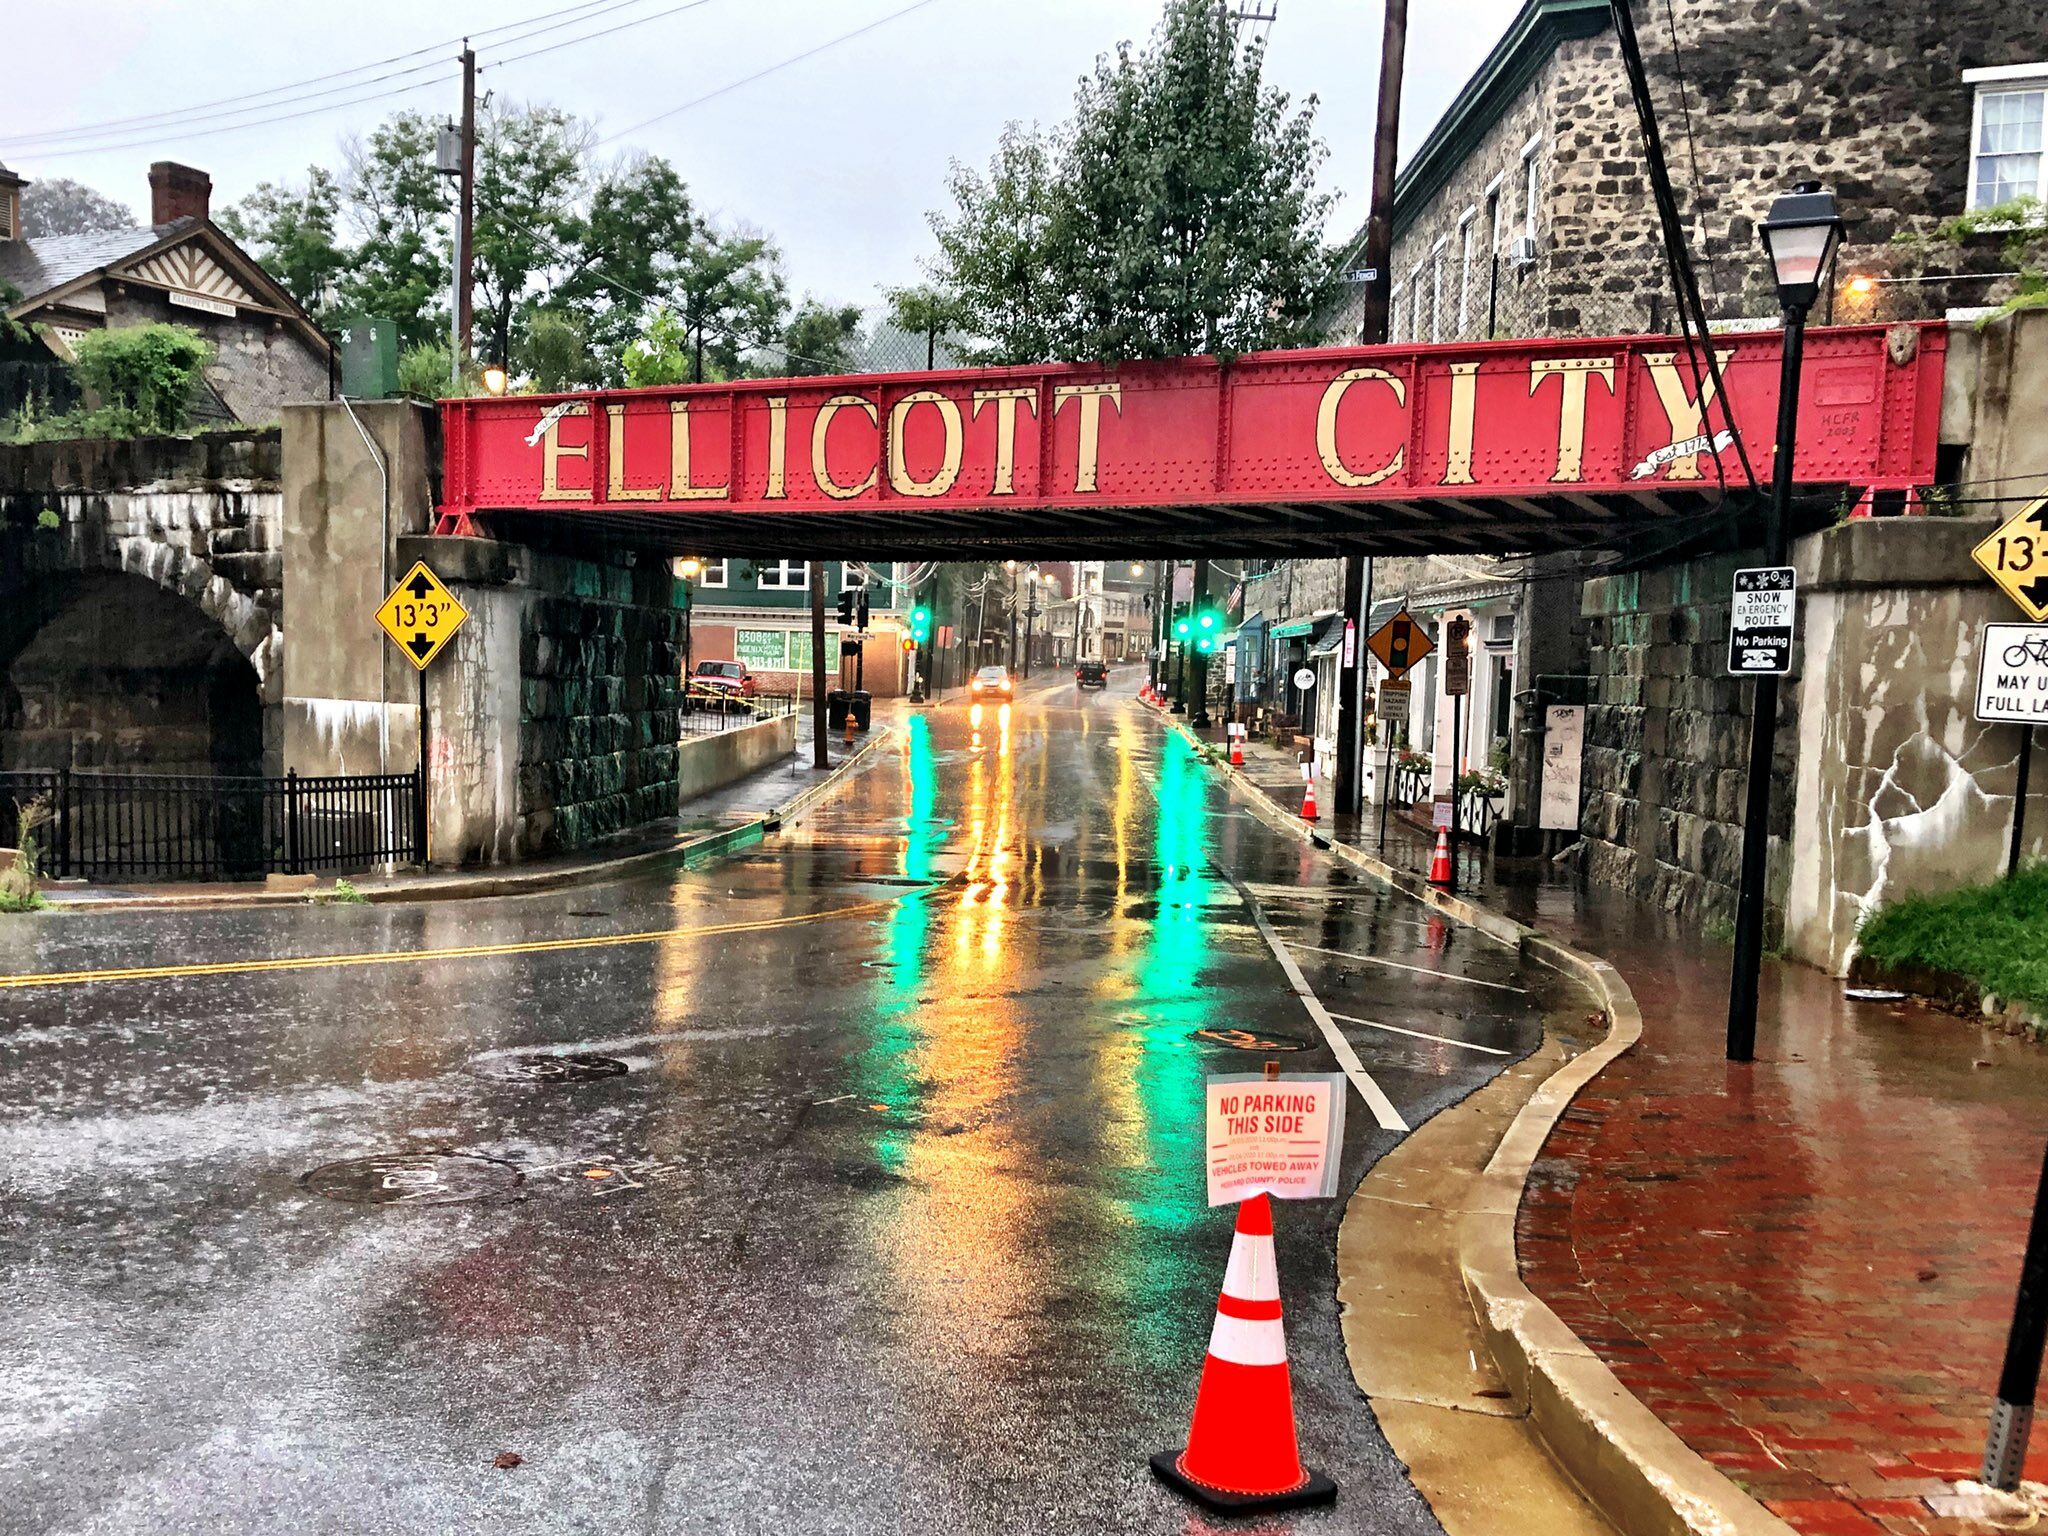 Price of Ellicott City flood prevention project balloons to 130